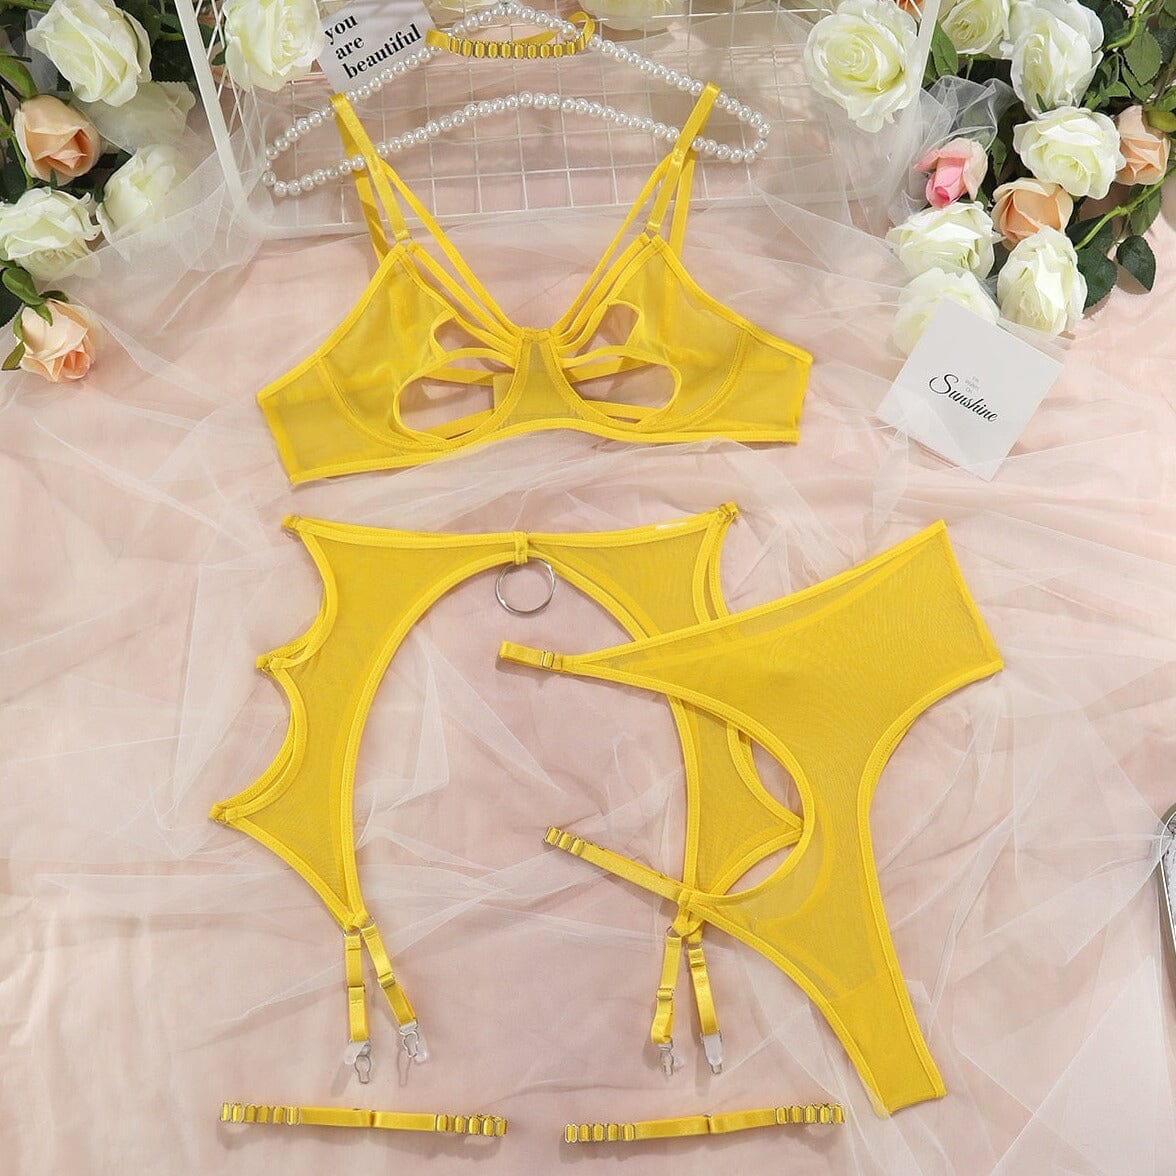 Cut Out Bra 4-Pieces Garters G-Strings Thongs Lace Sexy Lingerie Accessories BlissGown 